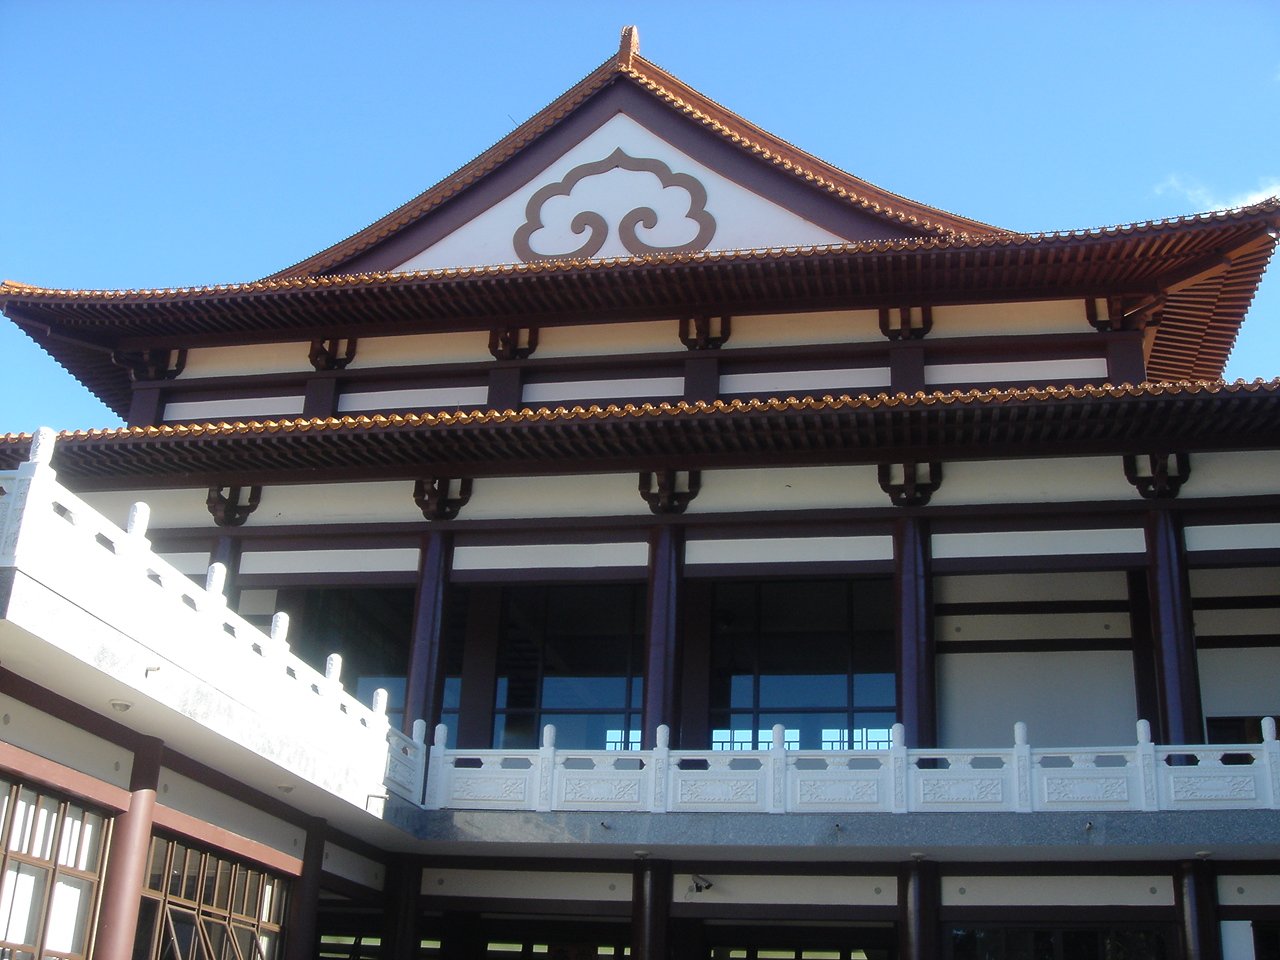 an asian building has brown and white tiles on it